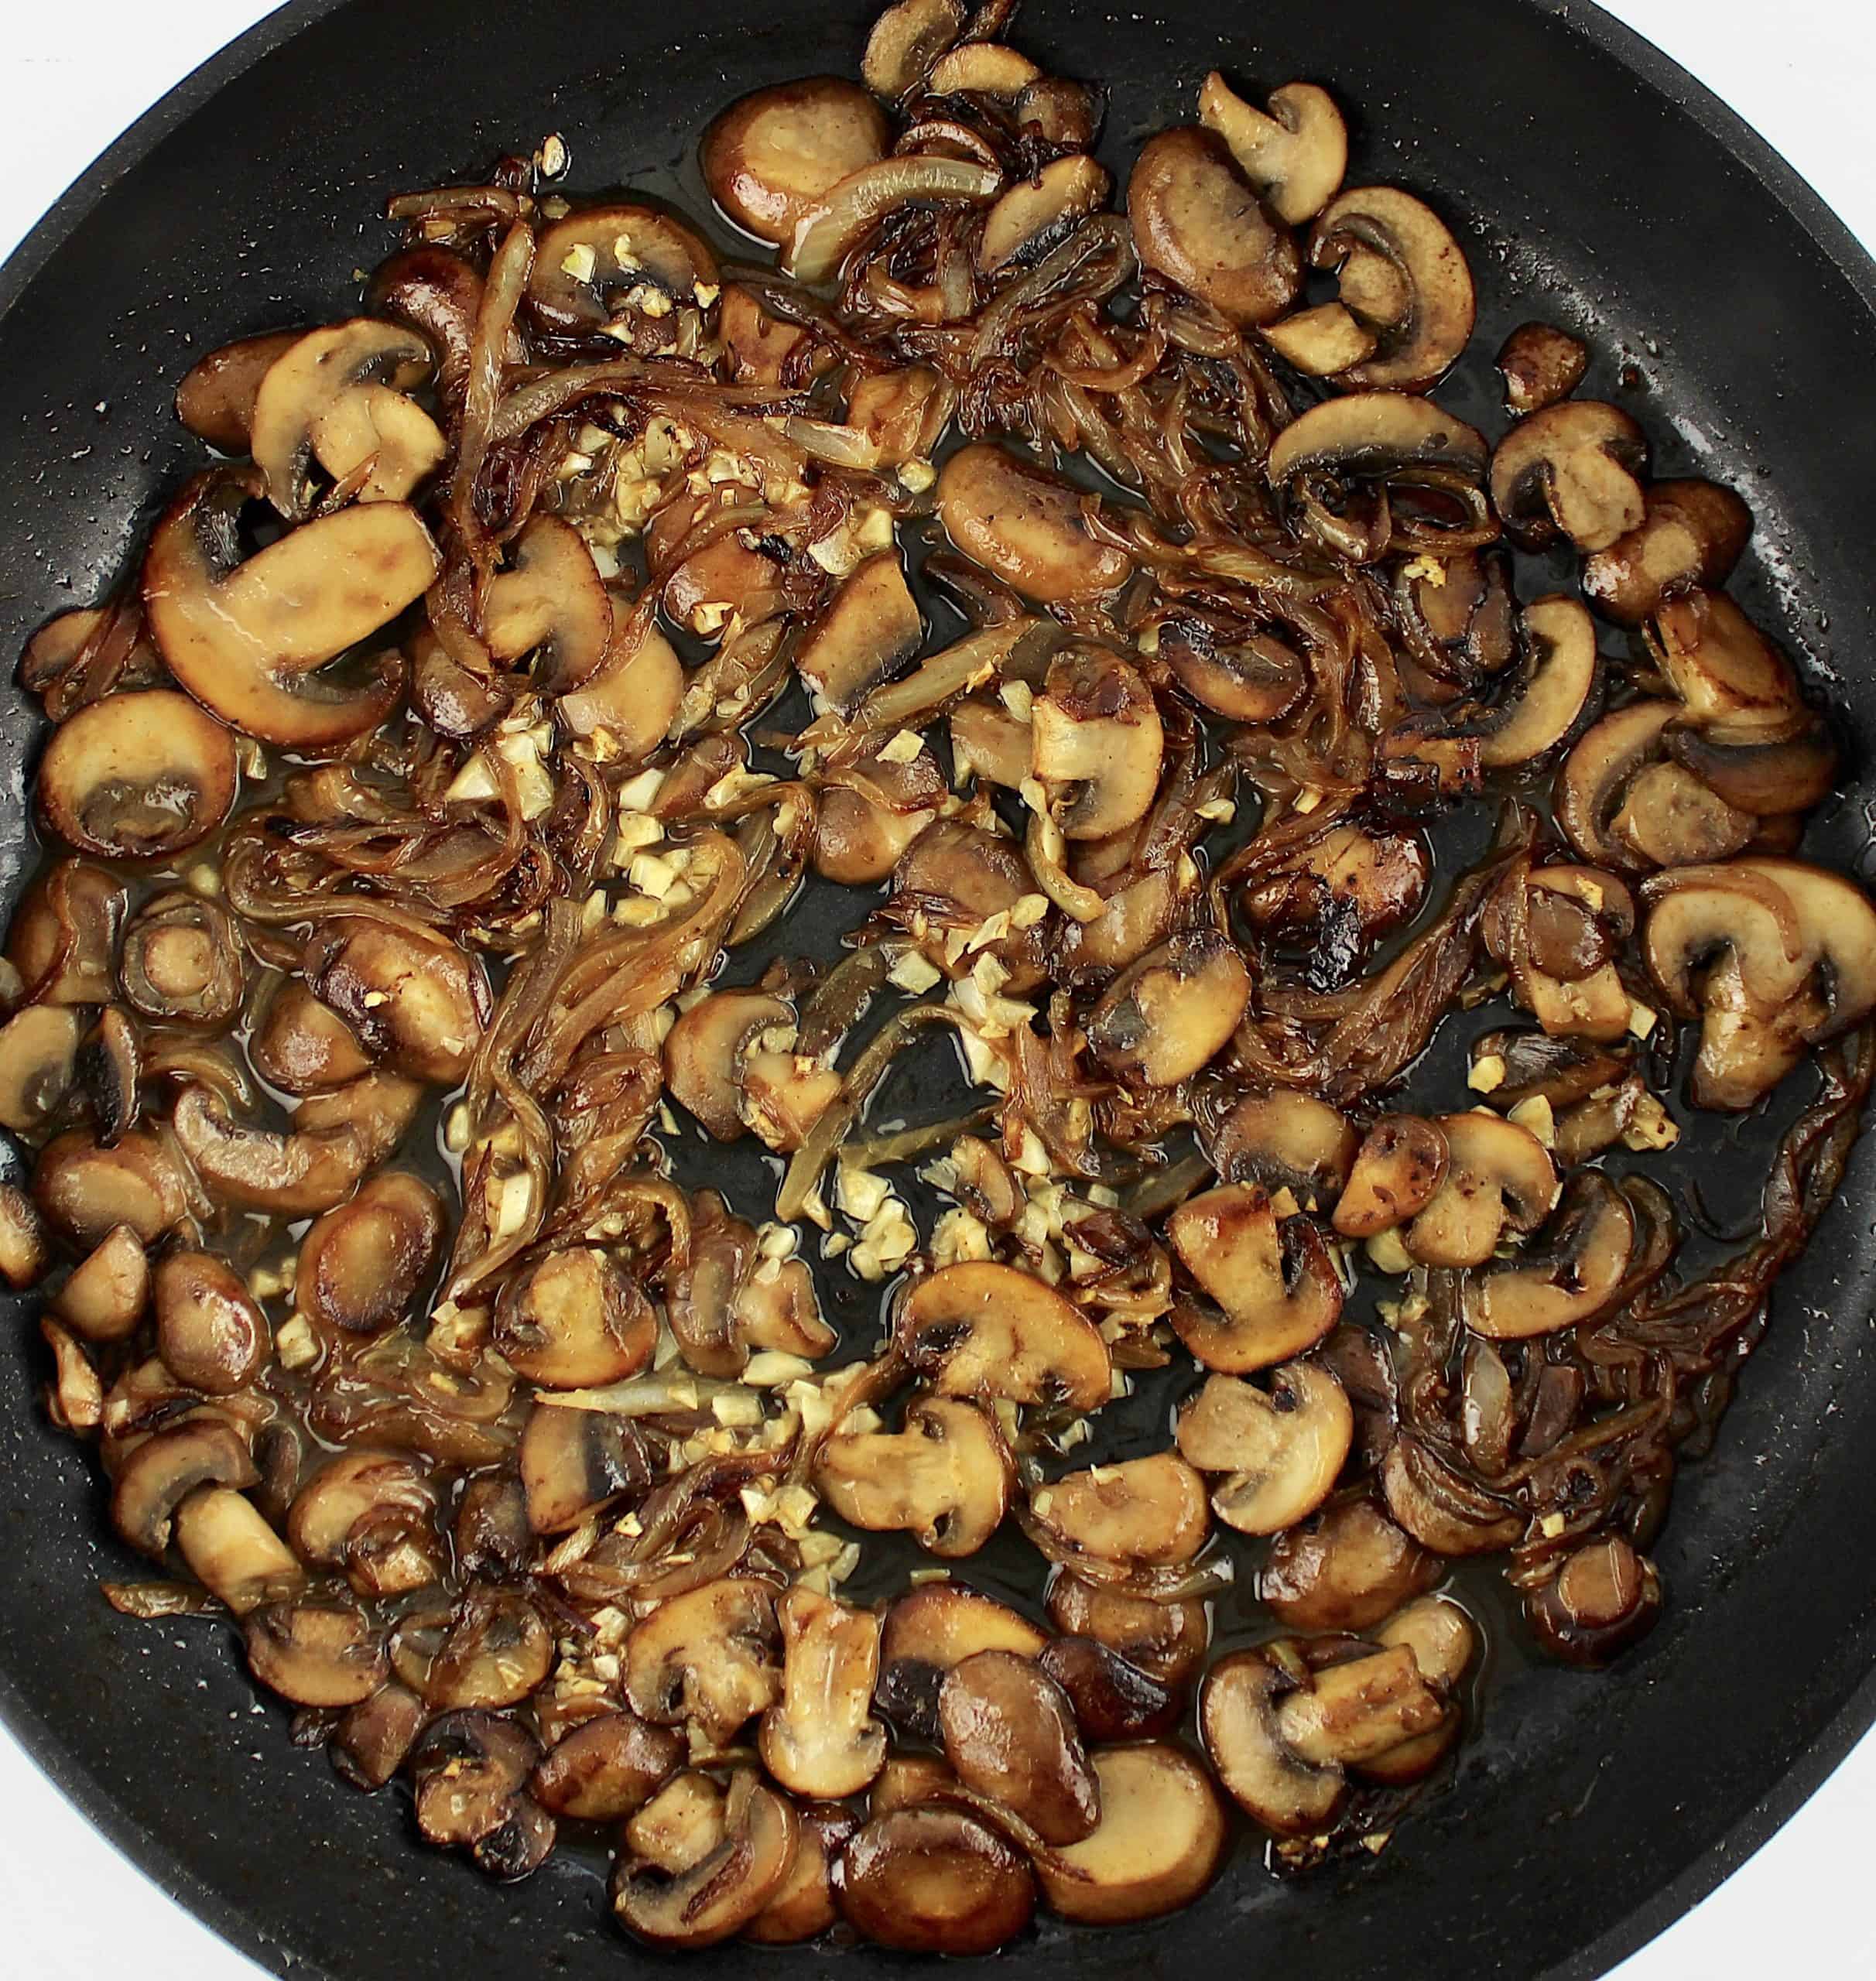 cooked sliced mushrooms onions and garlic in skillet with wine